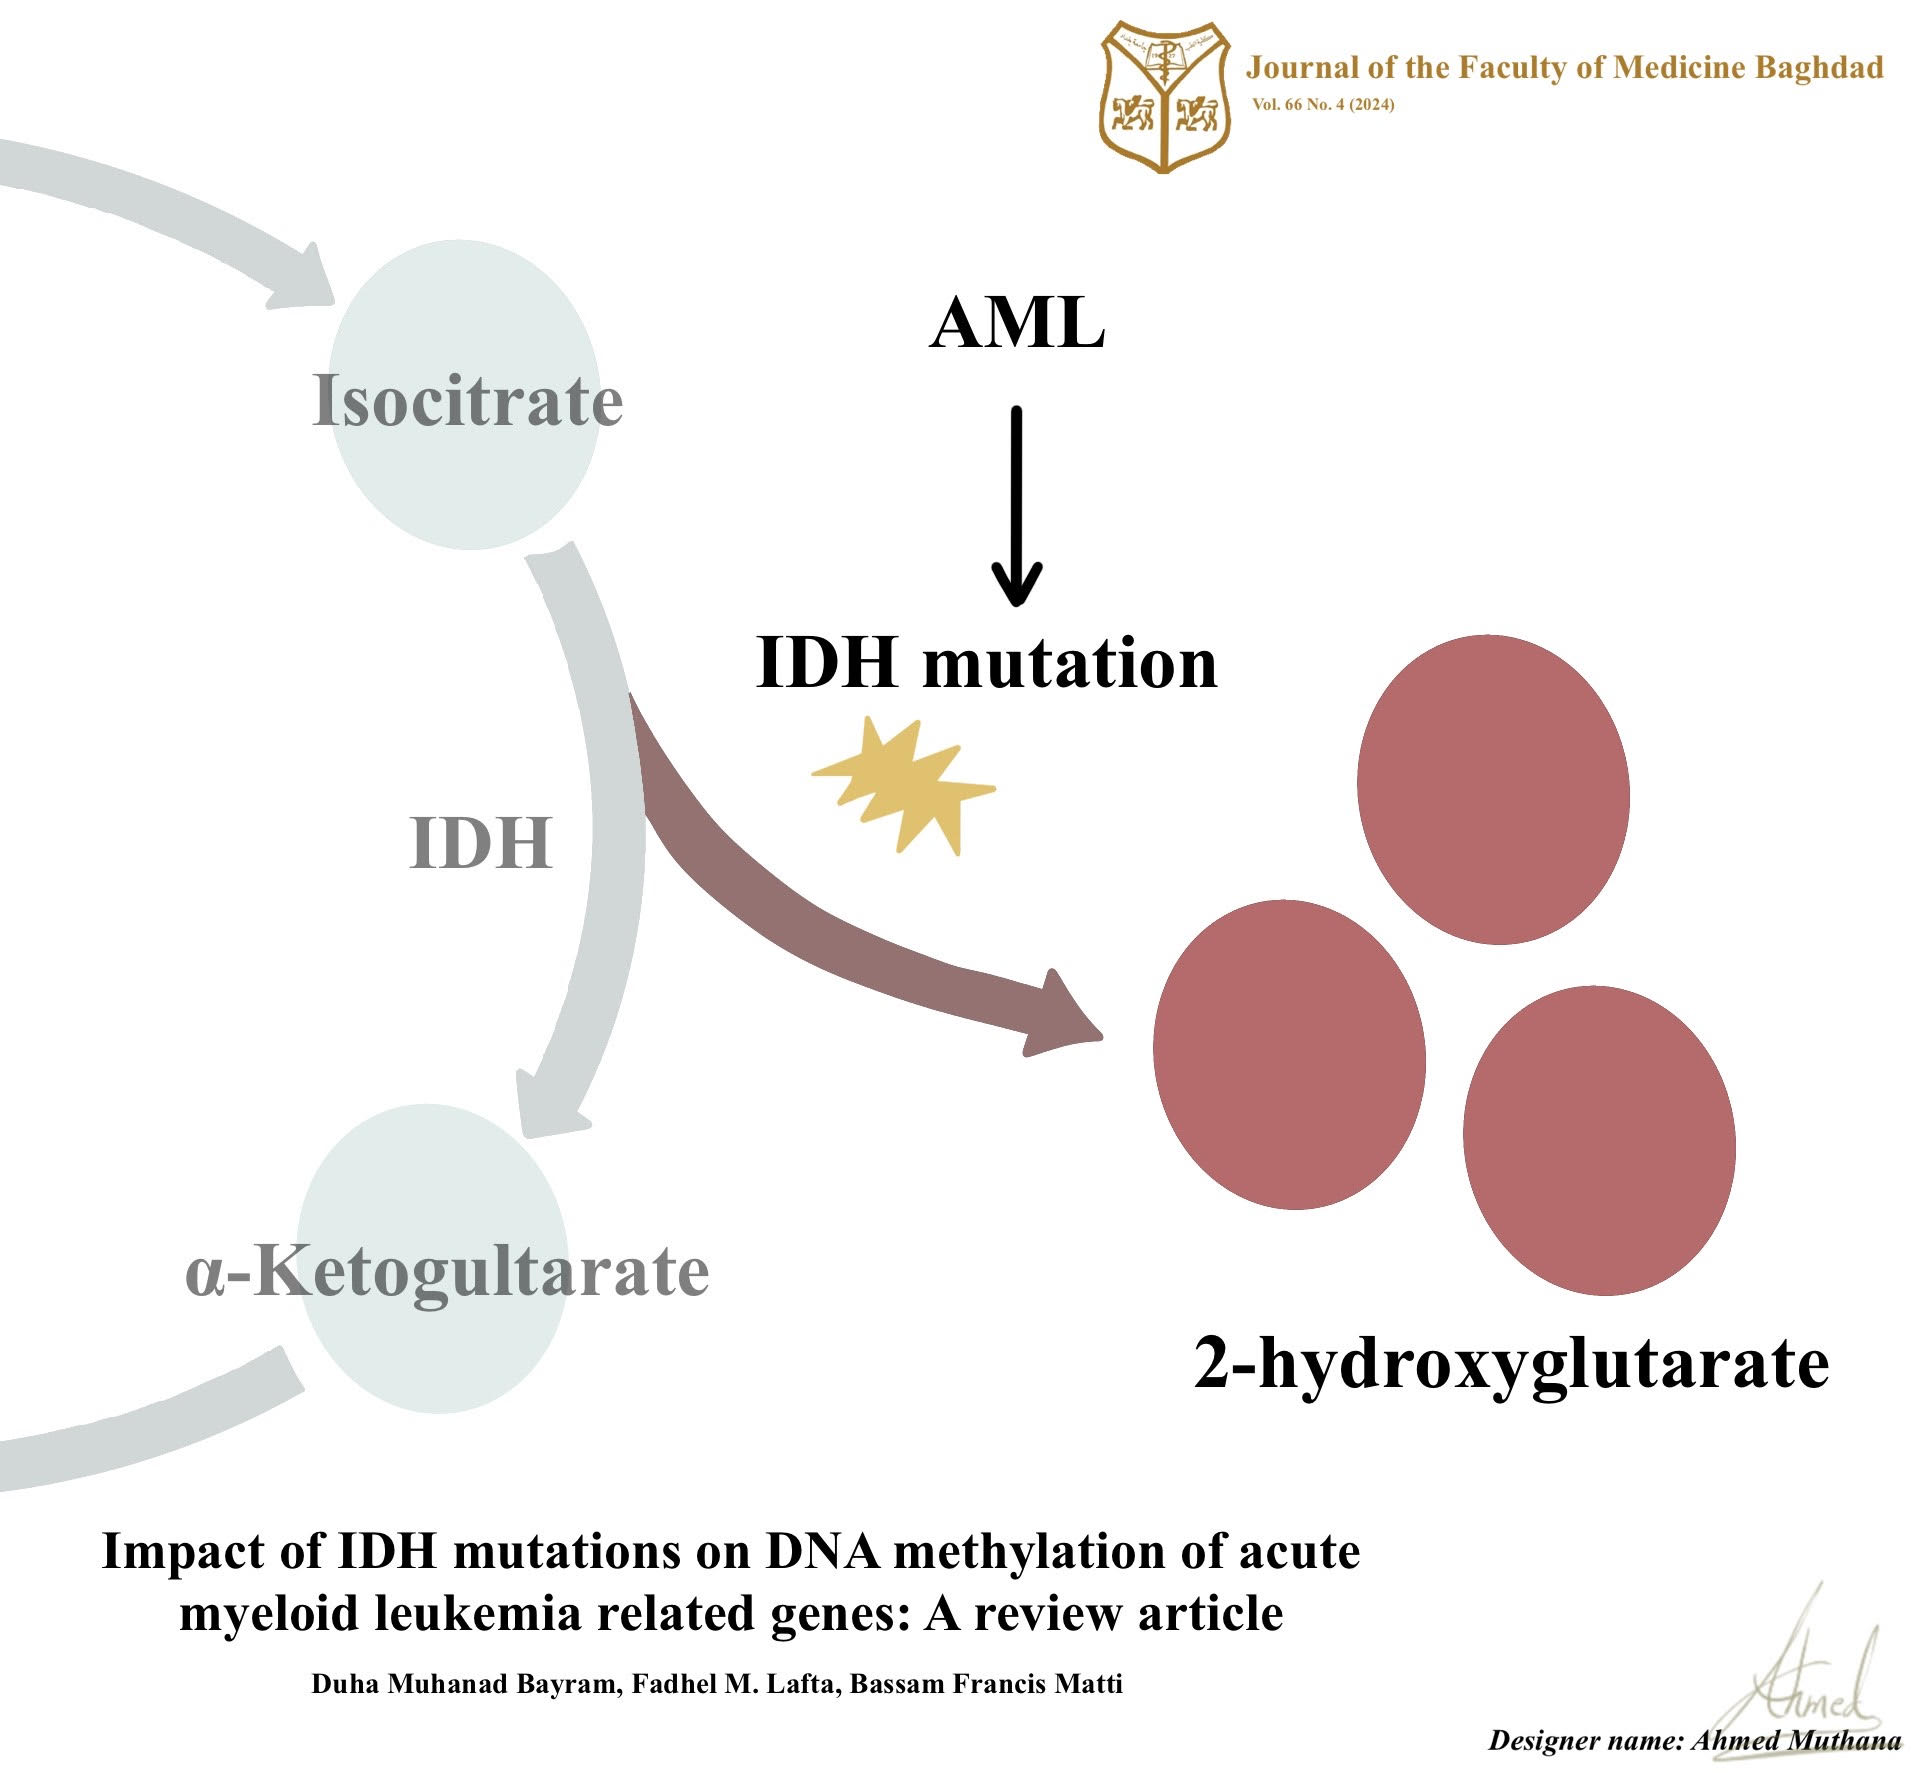 AML; , DNA methylation; , DNA methyltransferases; , IDH;, isocitrate dehydrogenase; , targeted therapy; , TET proteins;